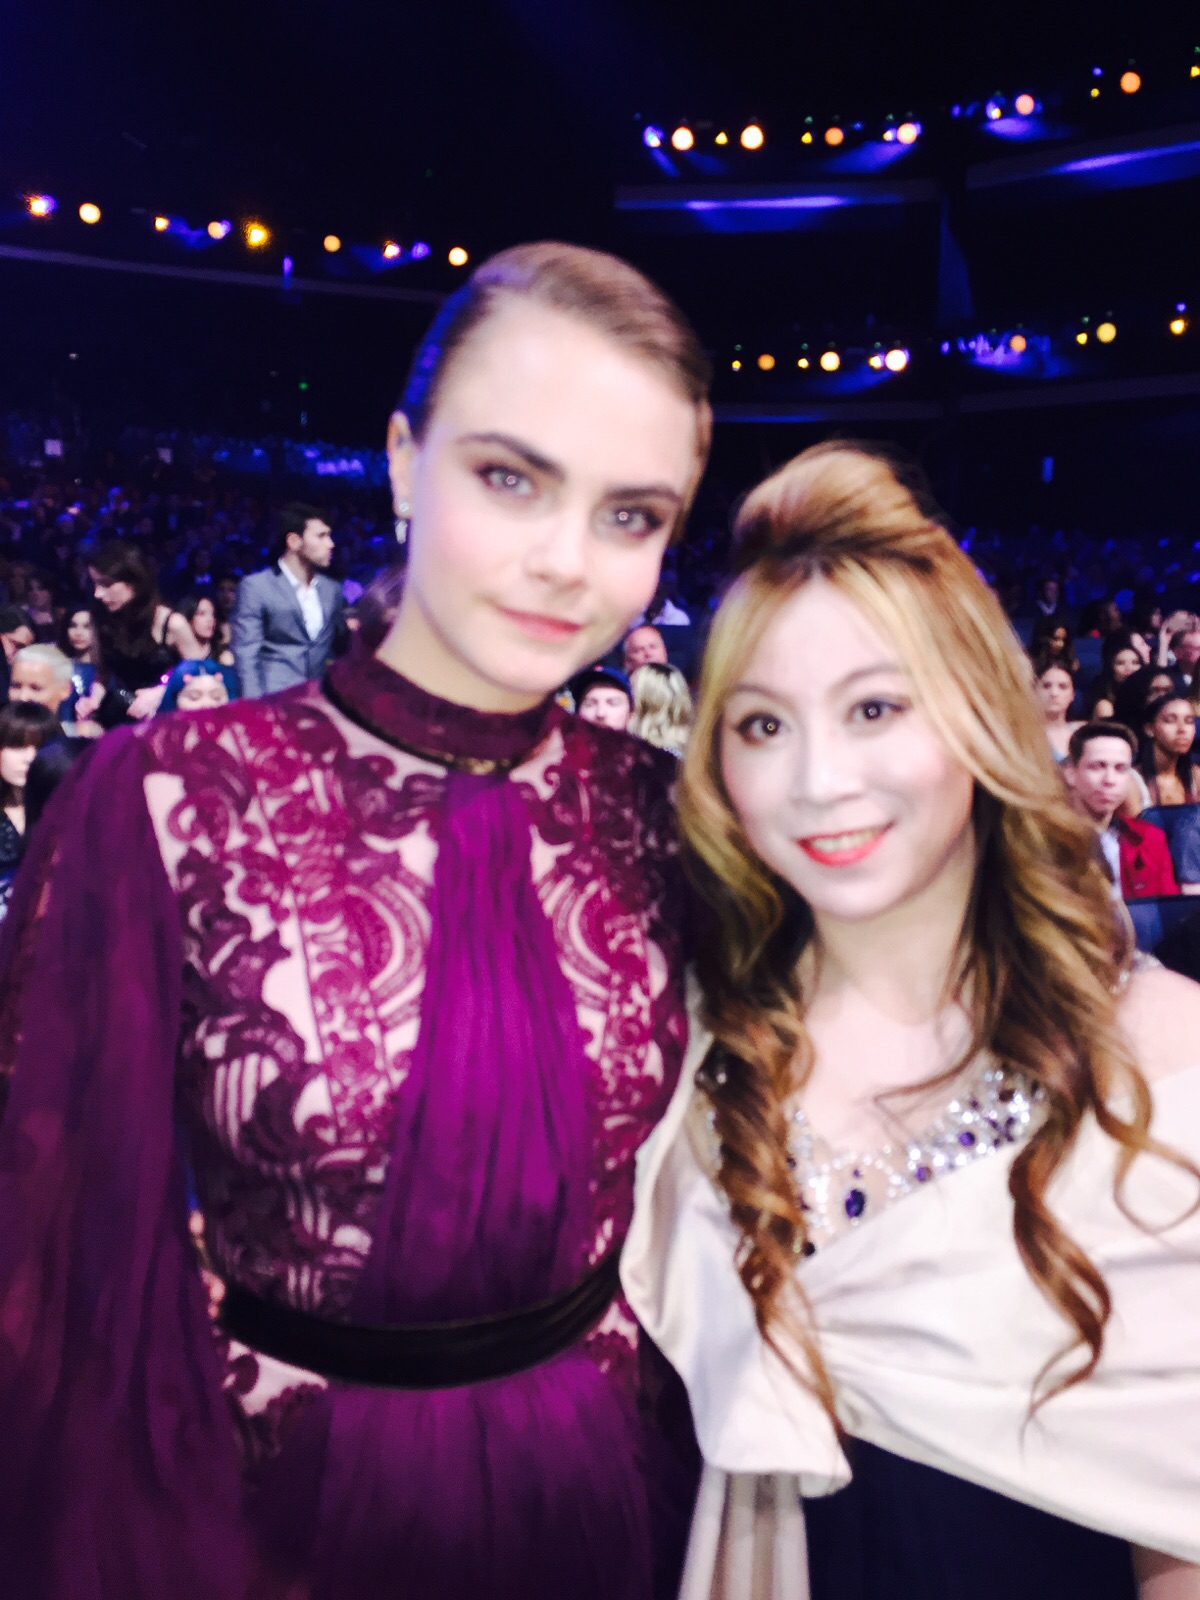 Actresses /model Cara Delevingne and Alice Aoki attend The 2015 MTV Movie Awards at Nokia Theatre L.A. Live on April 12, 2015 in Los Angeles, California.